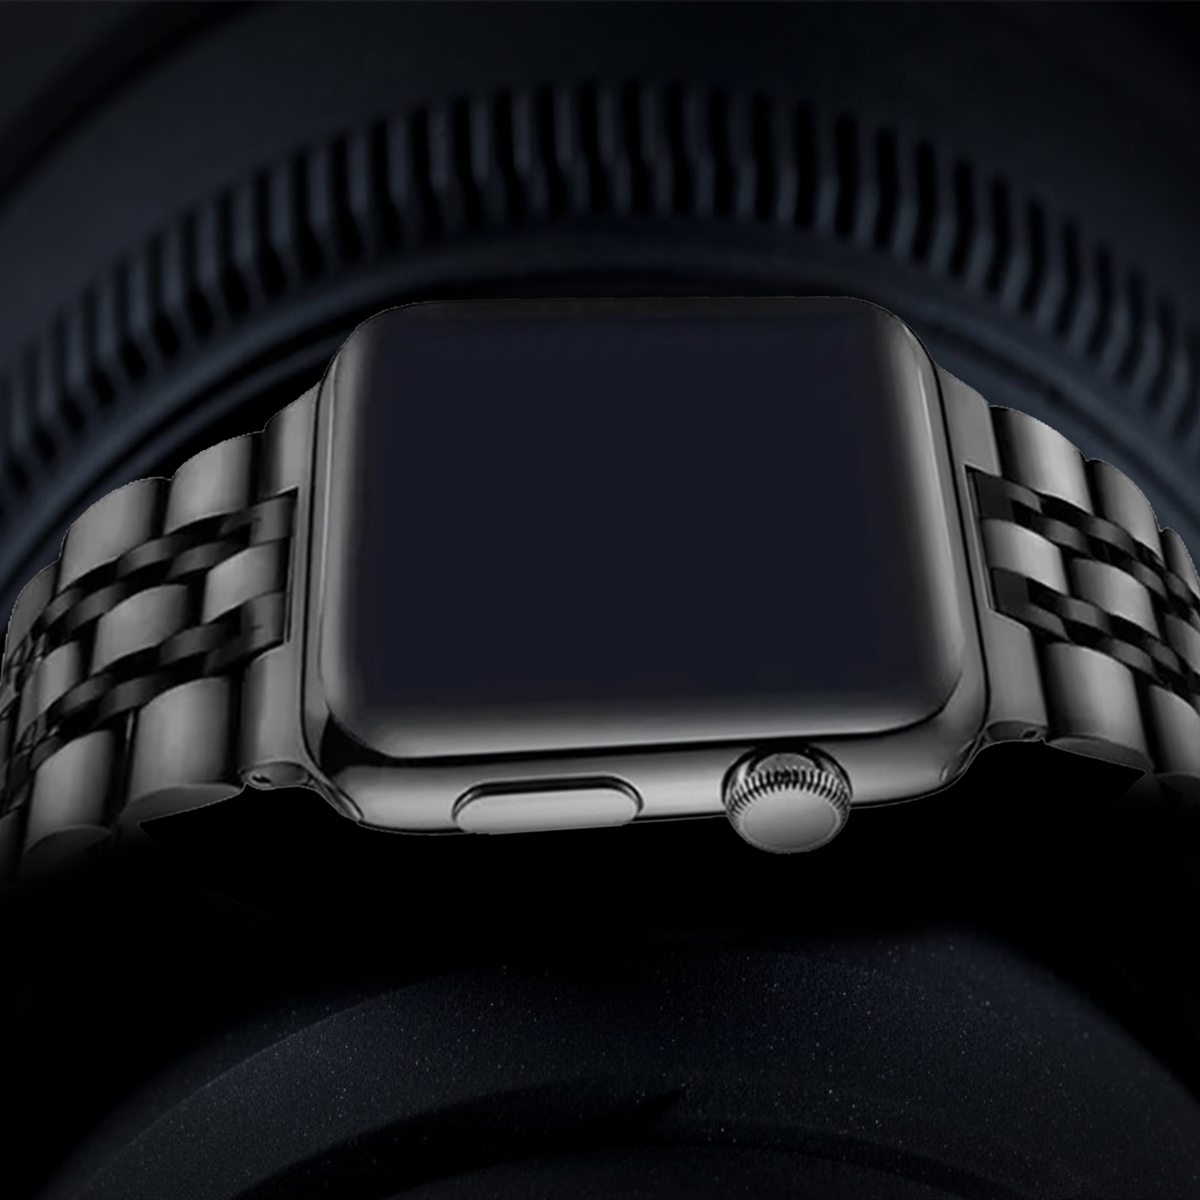 Black Glossy Matte Link Strap For iWatch